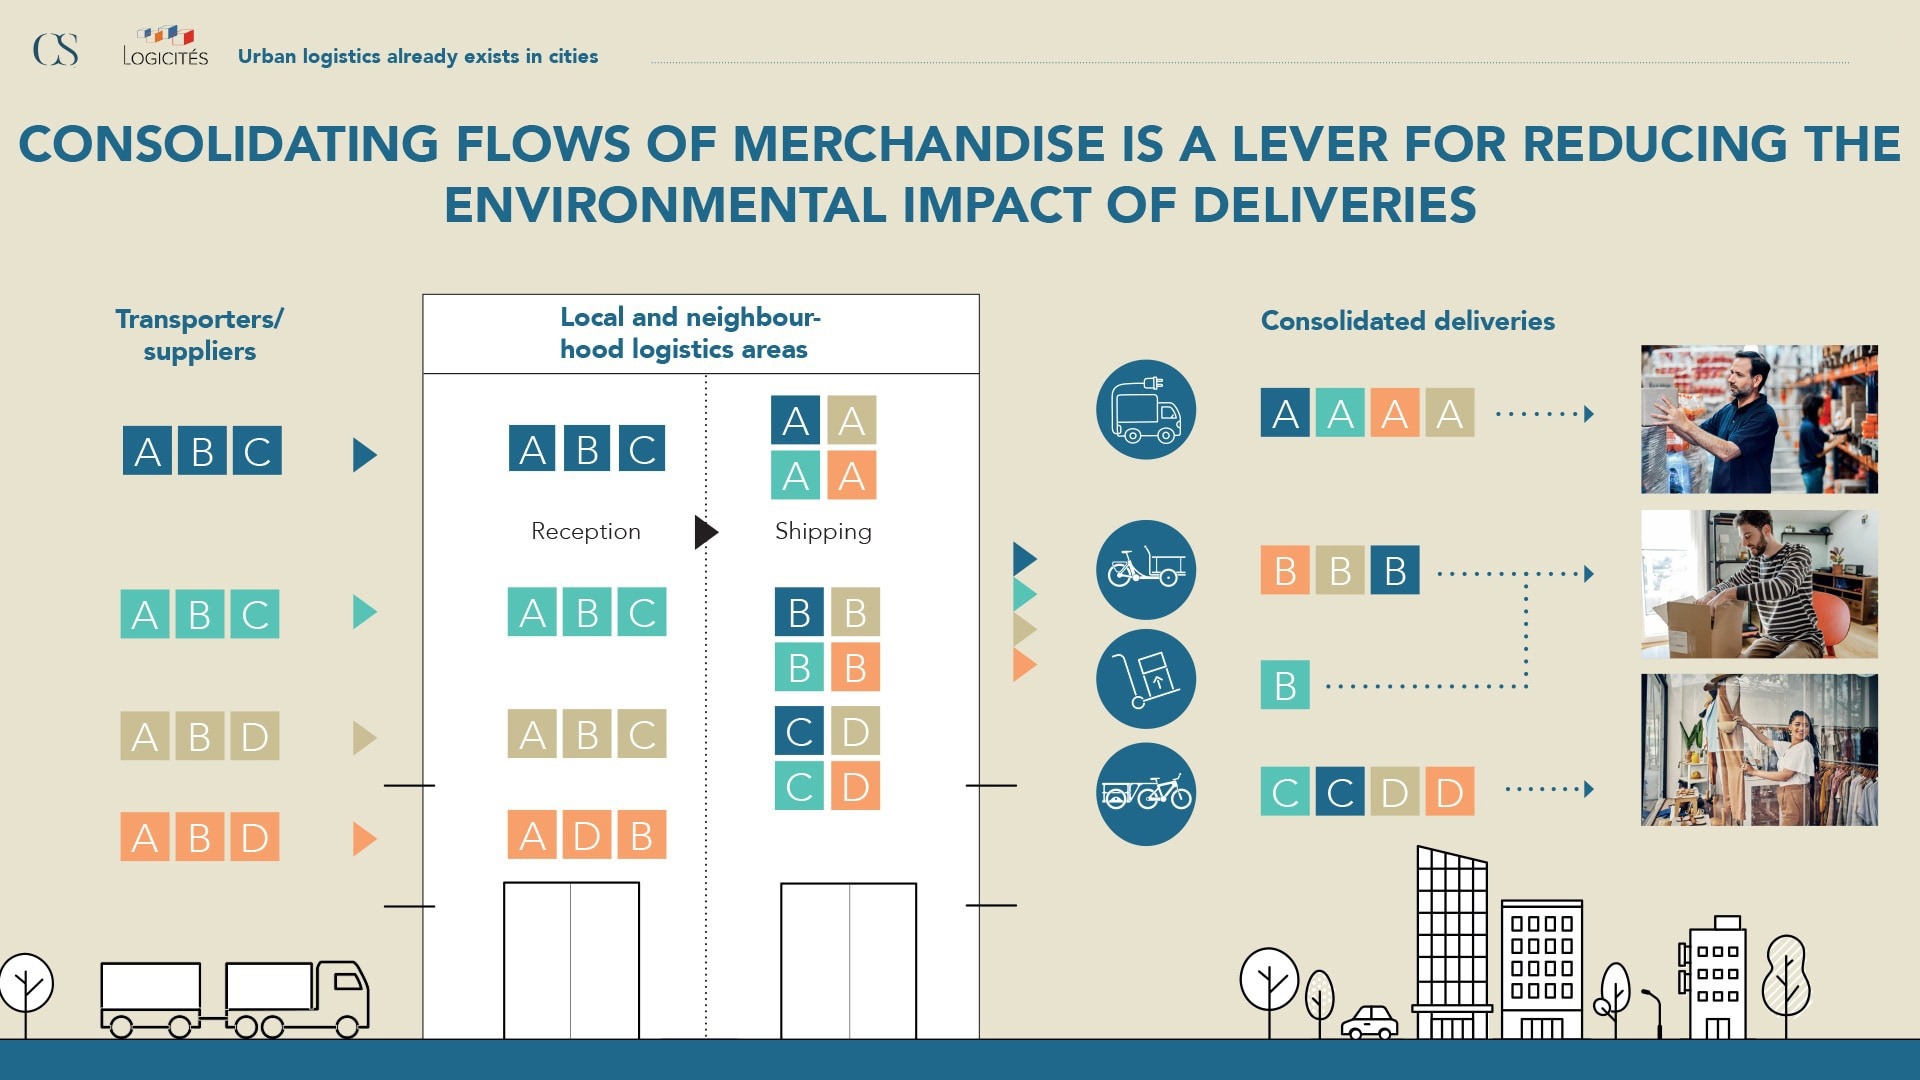 Consolidating flows of merchandise is a lever for reducing the environmental impact of deliveries